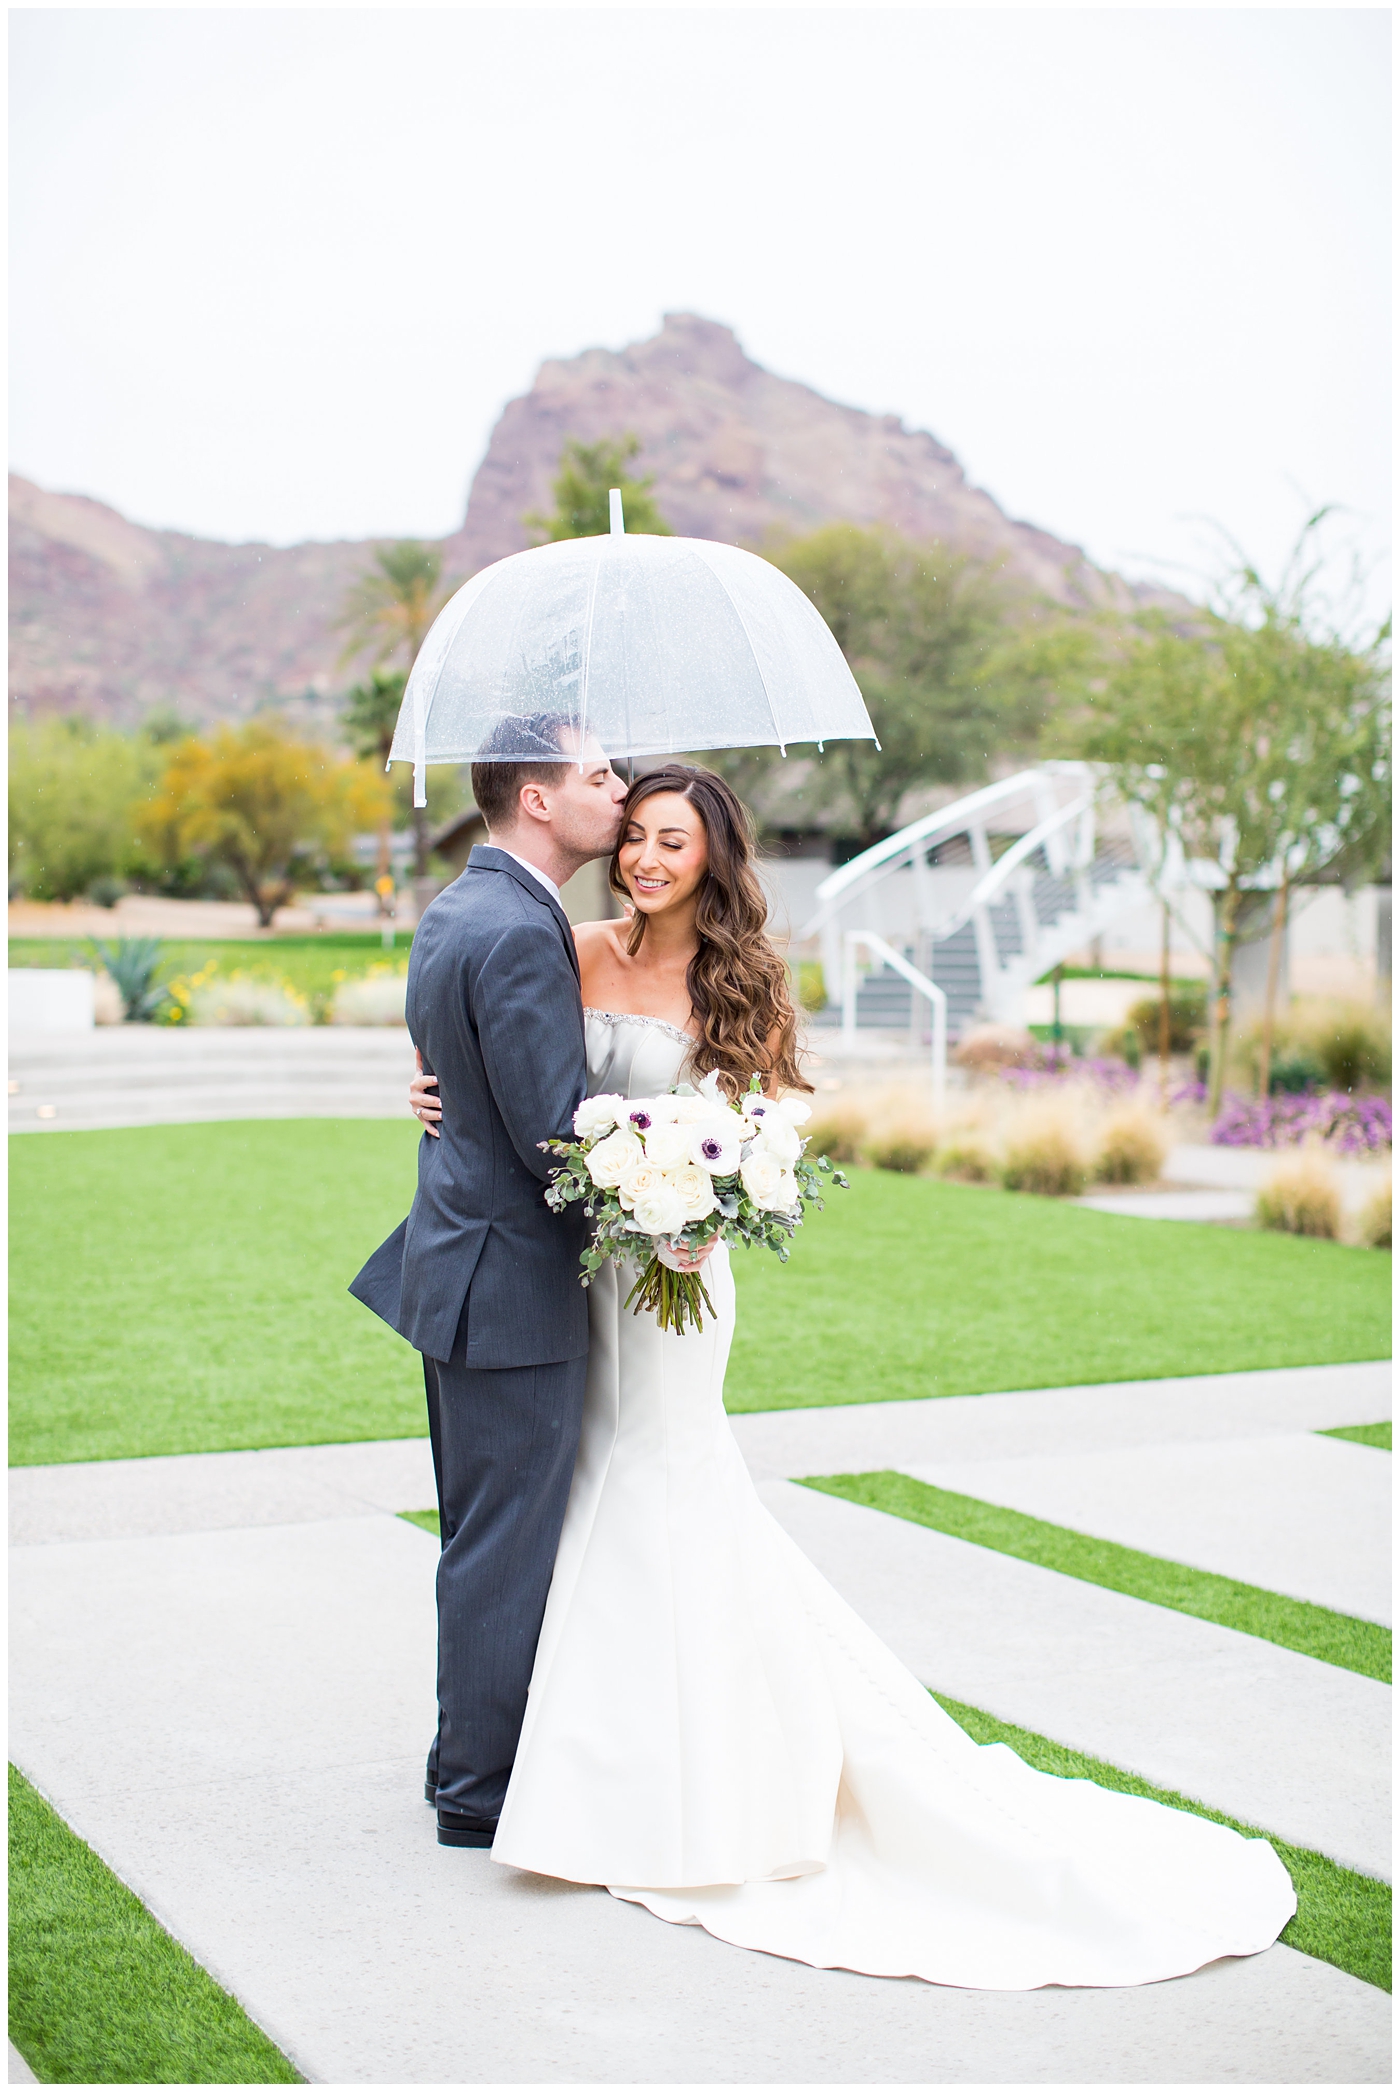 brunette bride getting into white strapless wedding dress with beaded top with White Anemones, roses, succulents, and greenery wedding bridal bouquet and groom in gray suit with gold tie wedding day portrait in the rain under clear umbrella